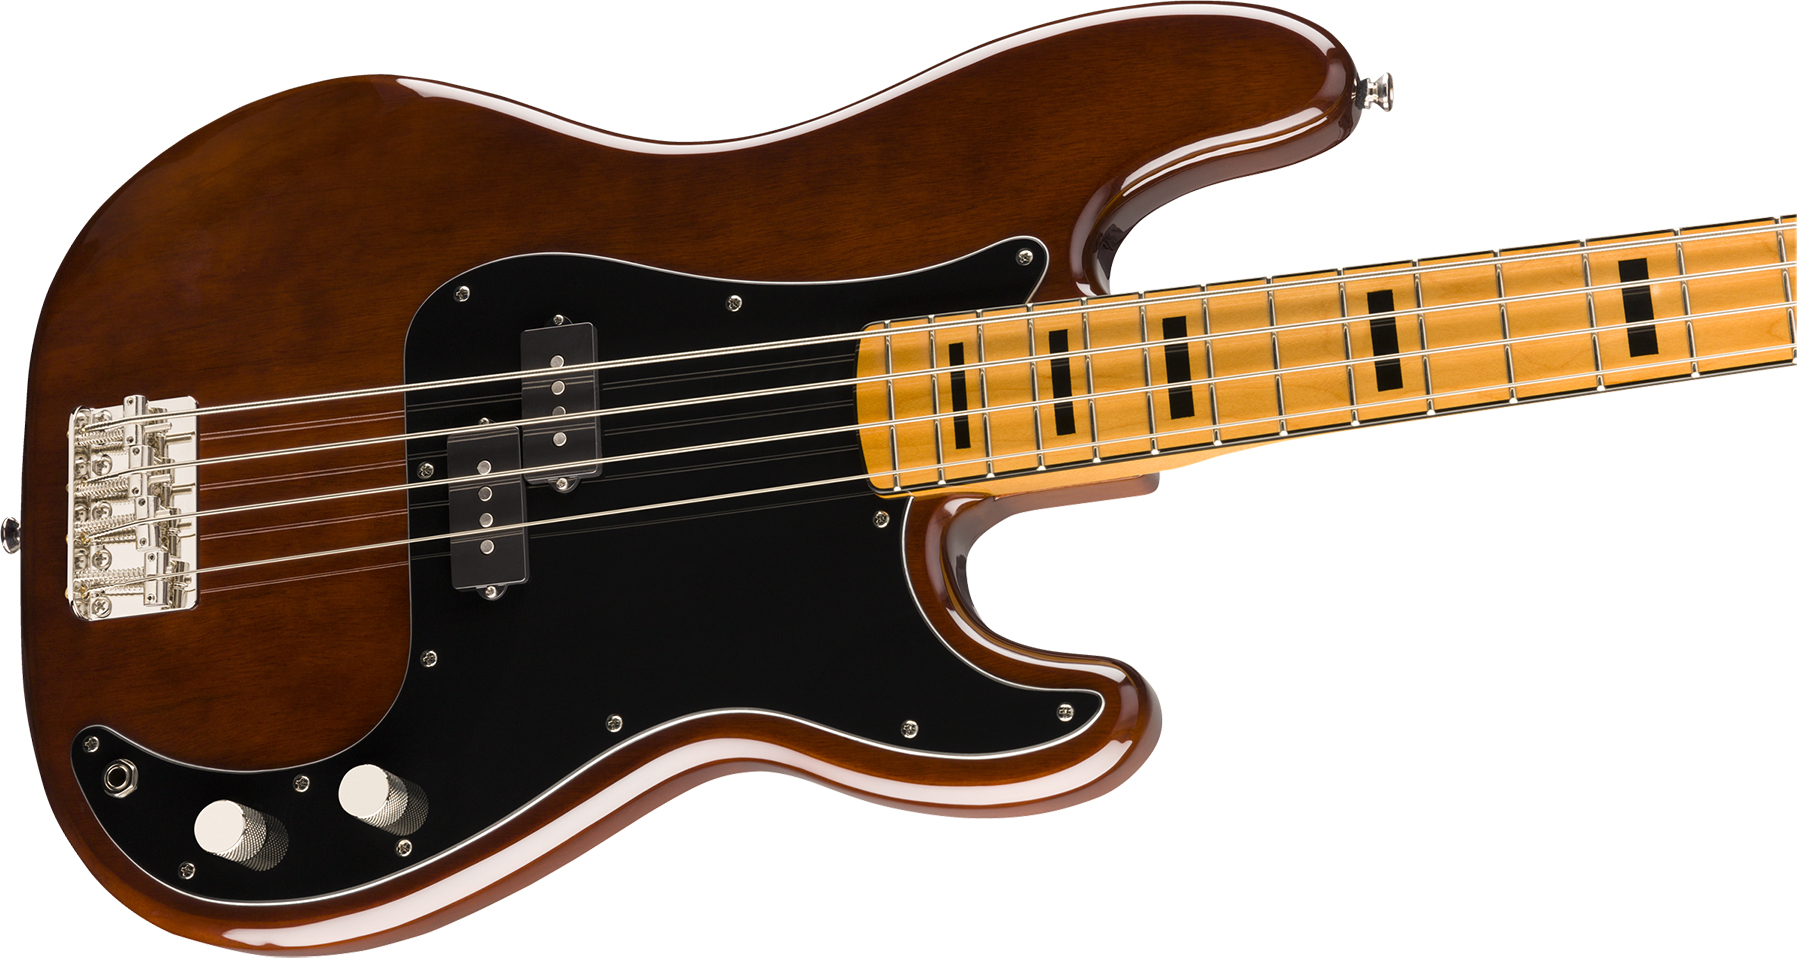 Squier Precision Bass '70s Classic Vibe 2019 Mn - Walnut - Basse Électrique Solid Body - Variation 2